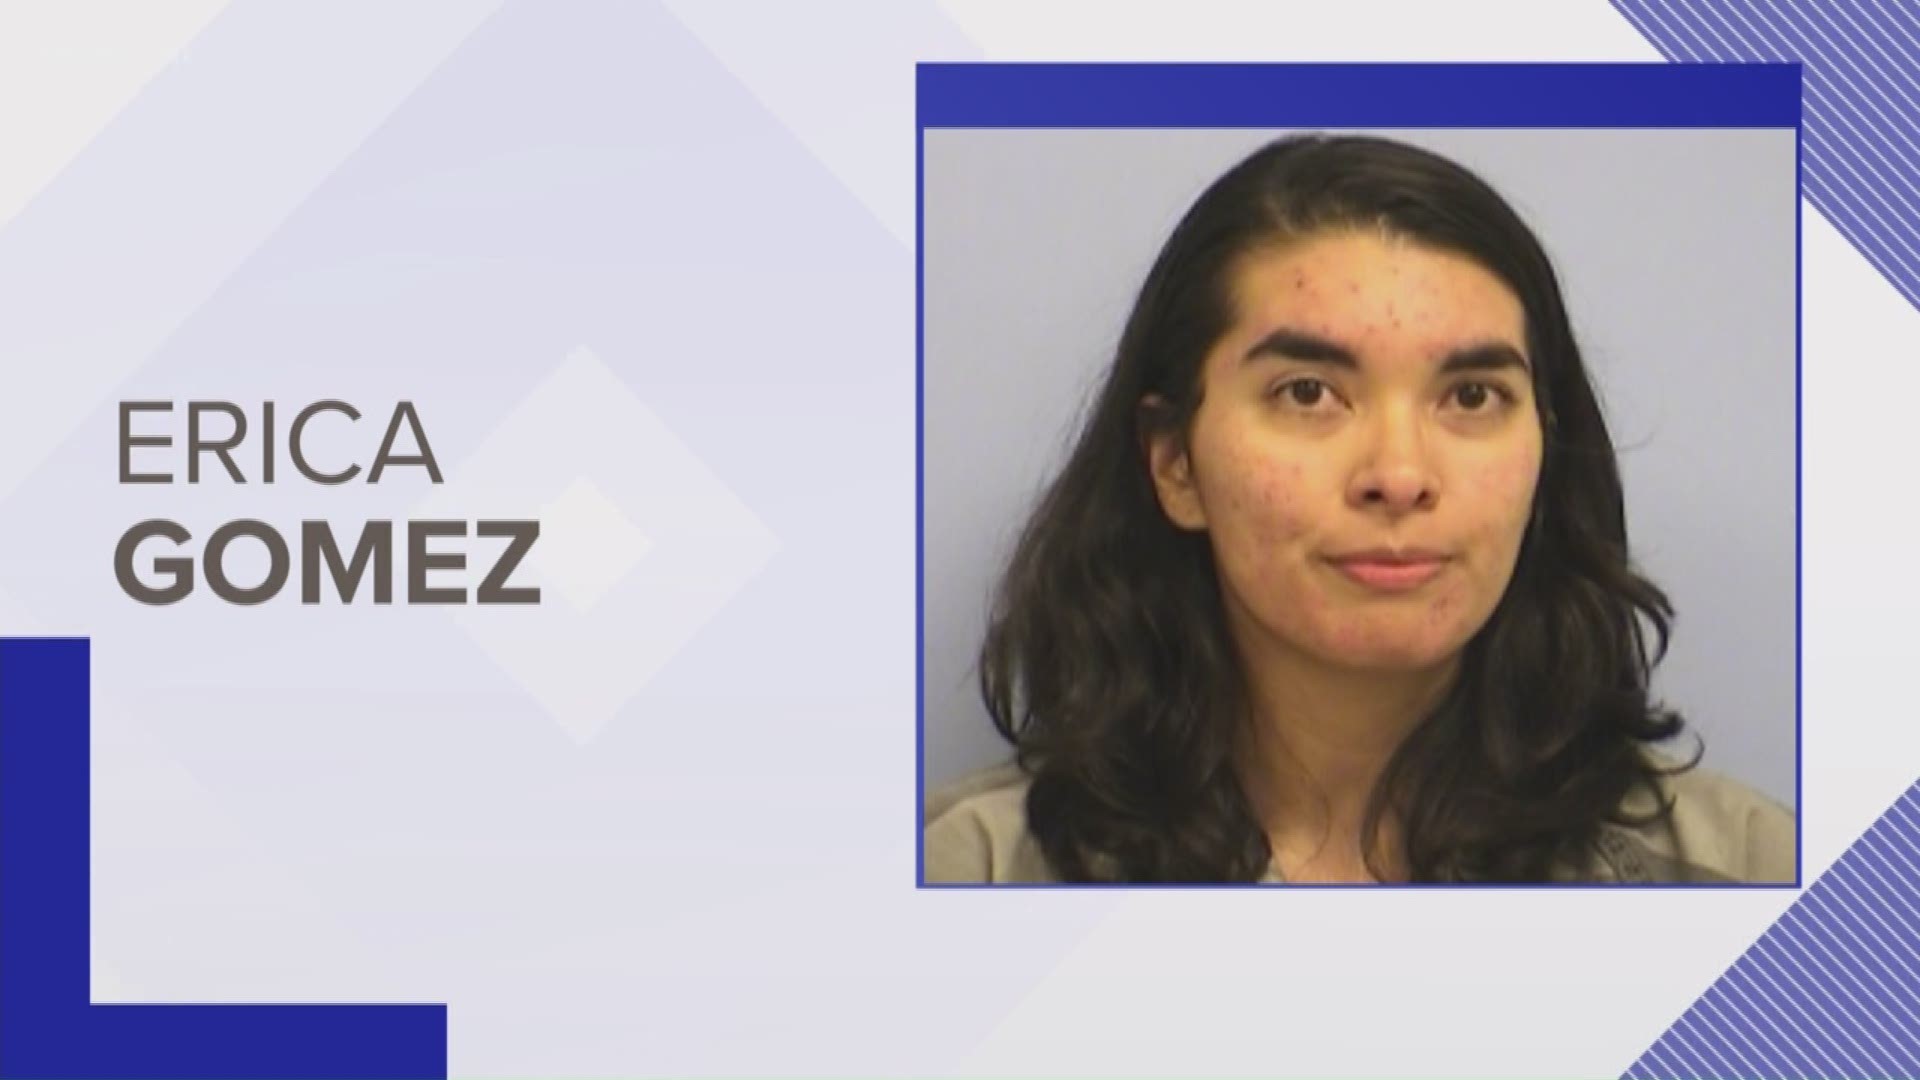 Authorities say a Bowie High School teacher admitted to having a sexual relationship with a student.